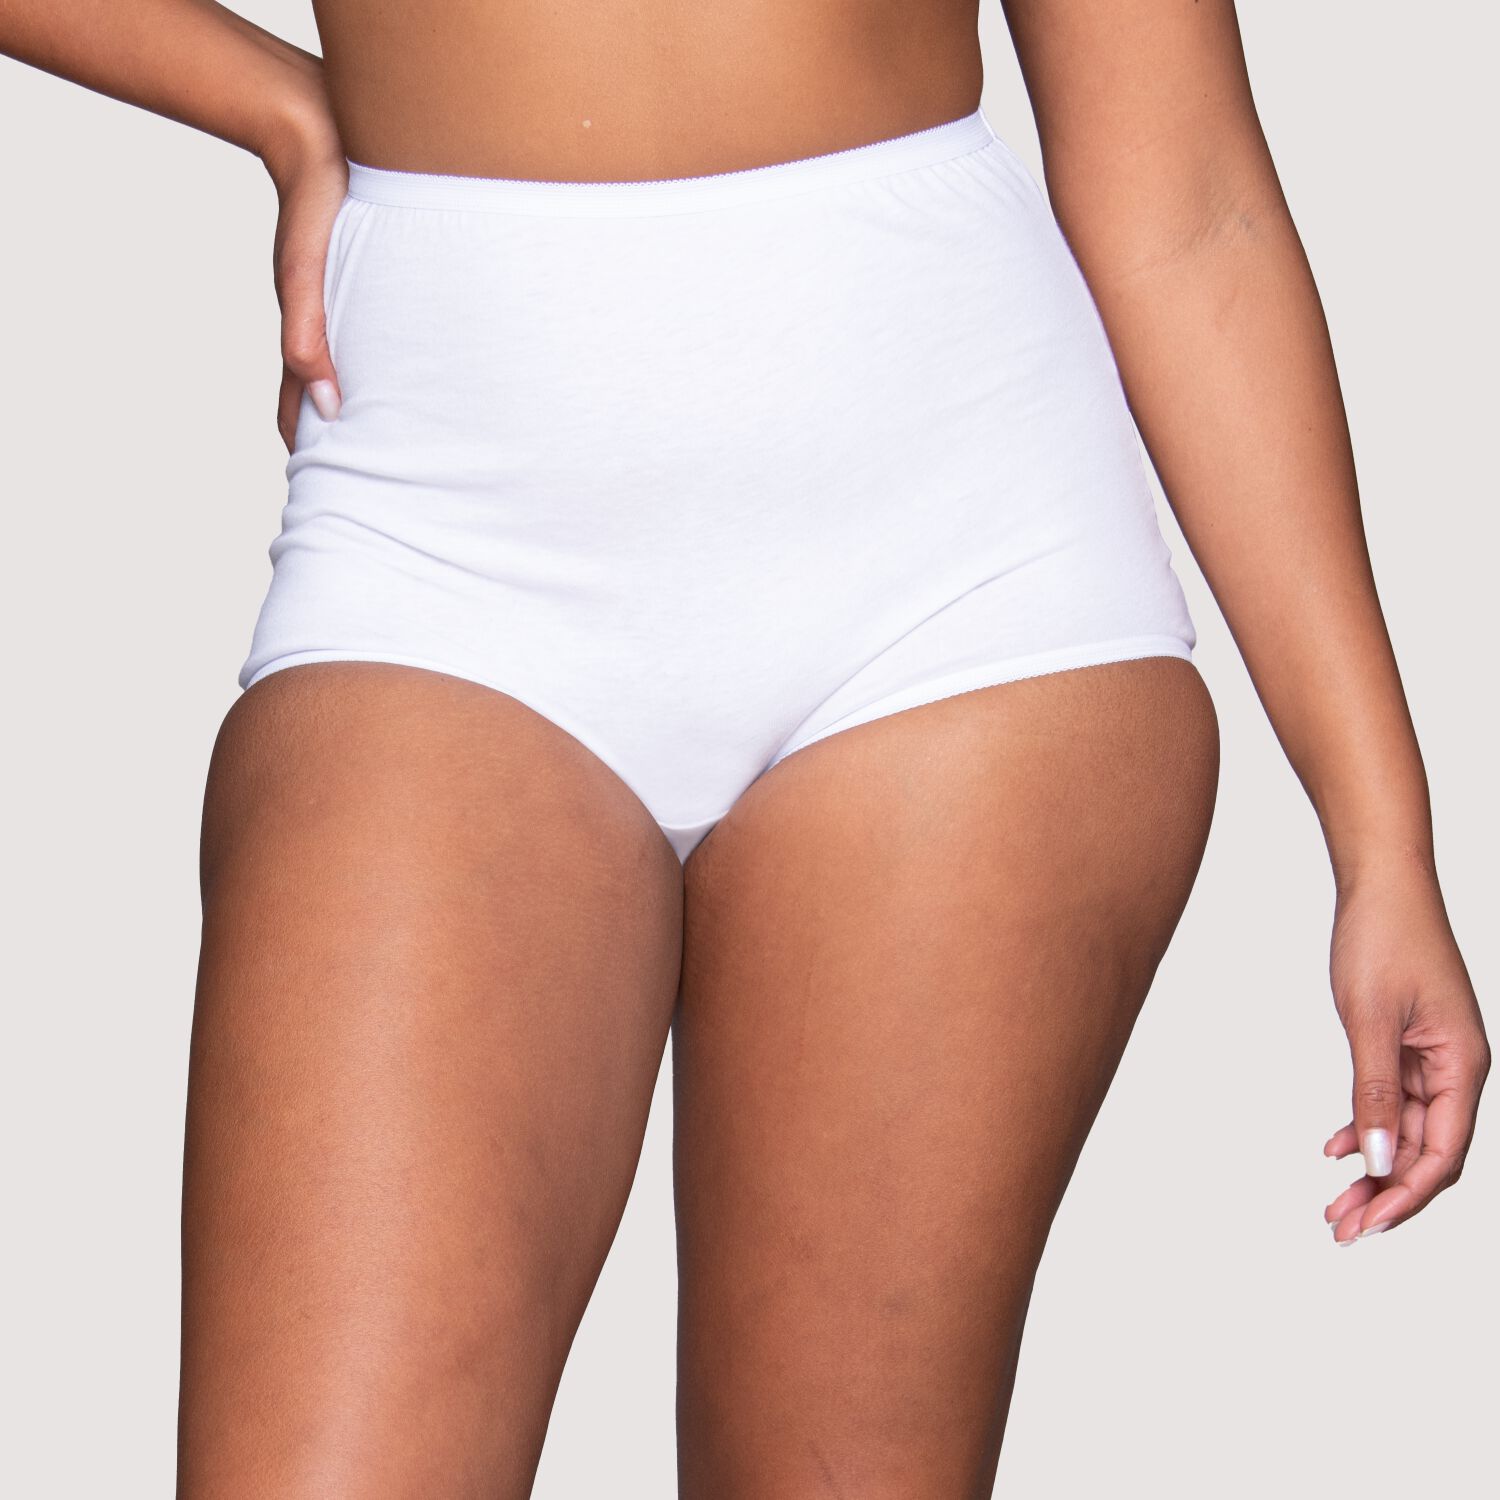 Fit for Me Plus Size Cotton Brief Panties - 3 Pack White 9 by